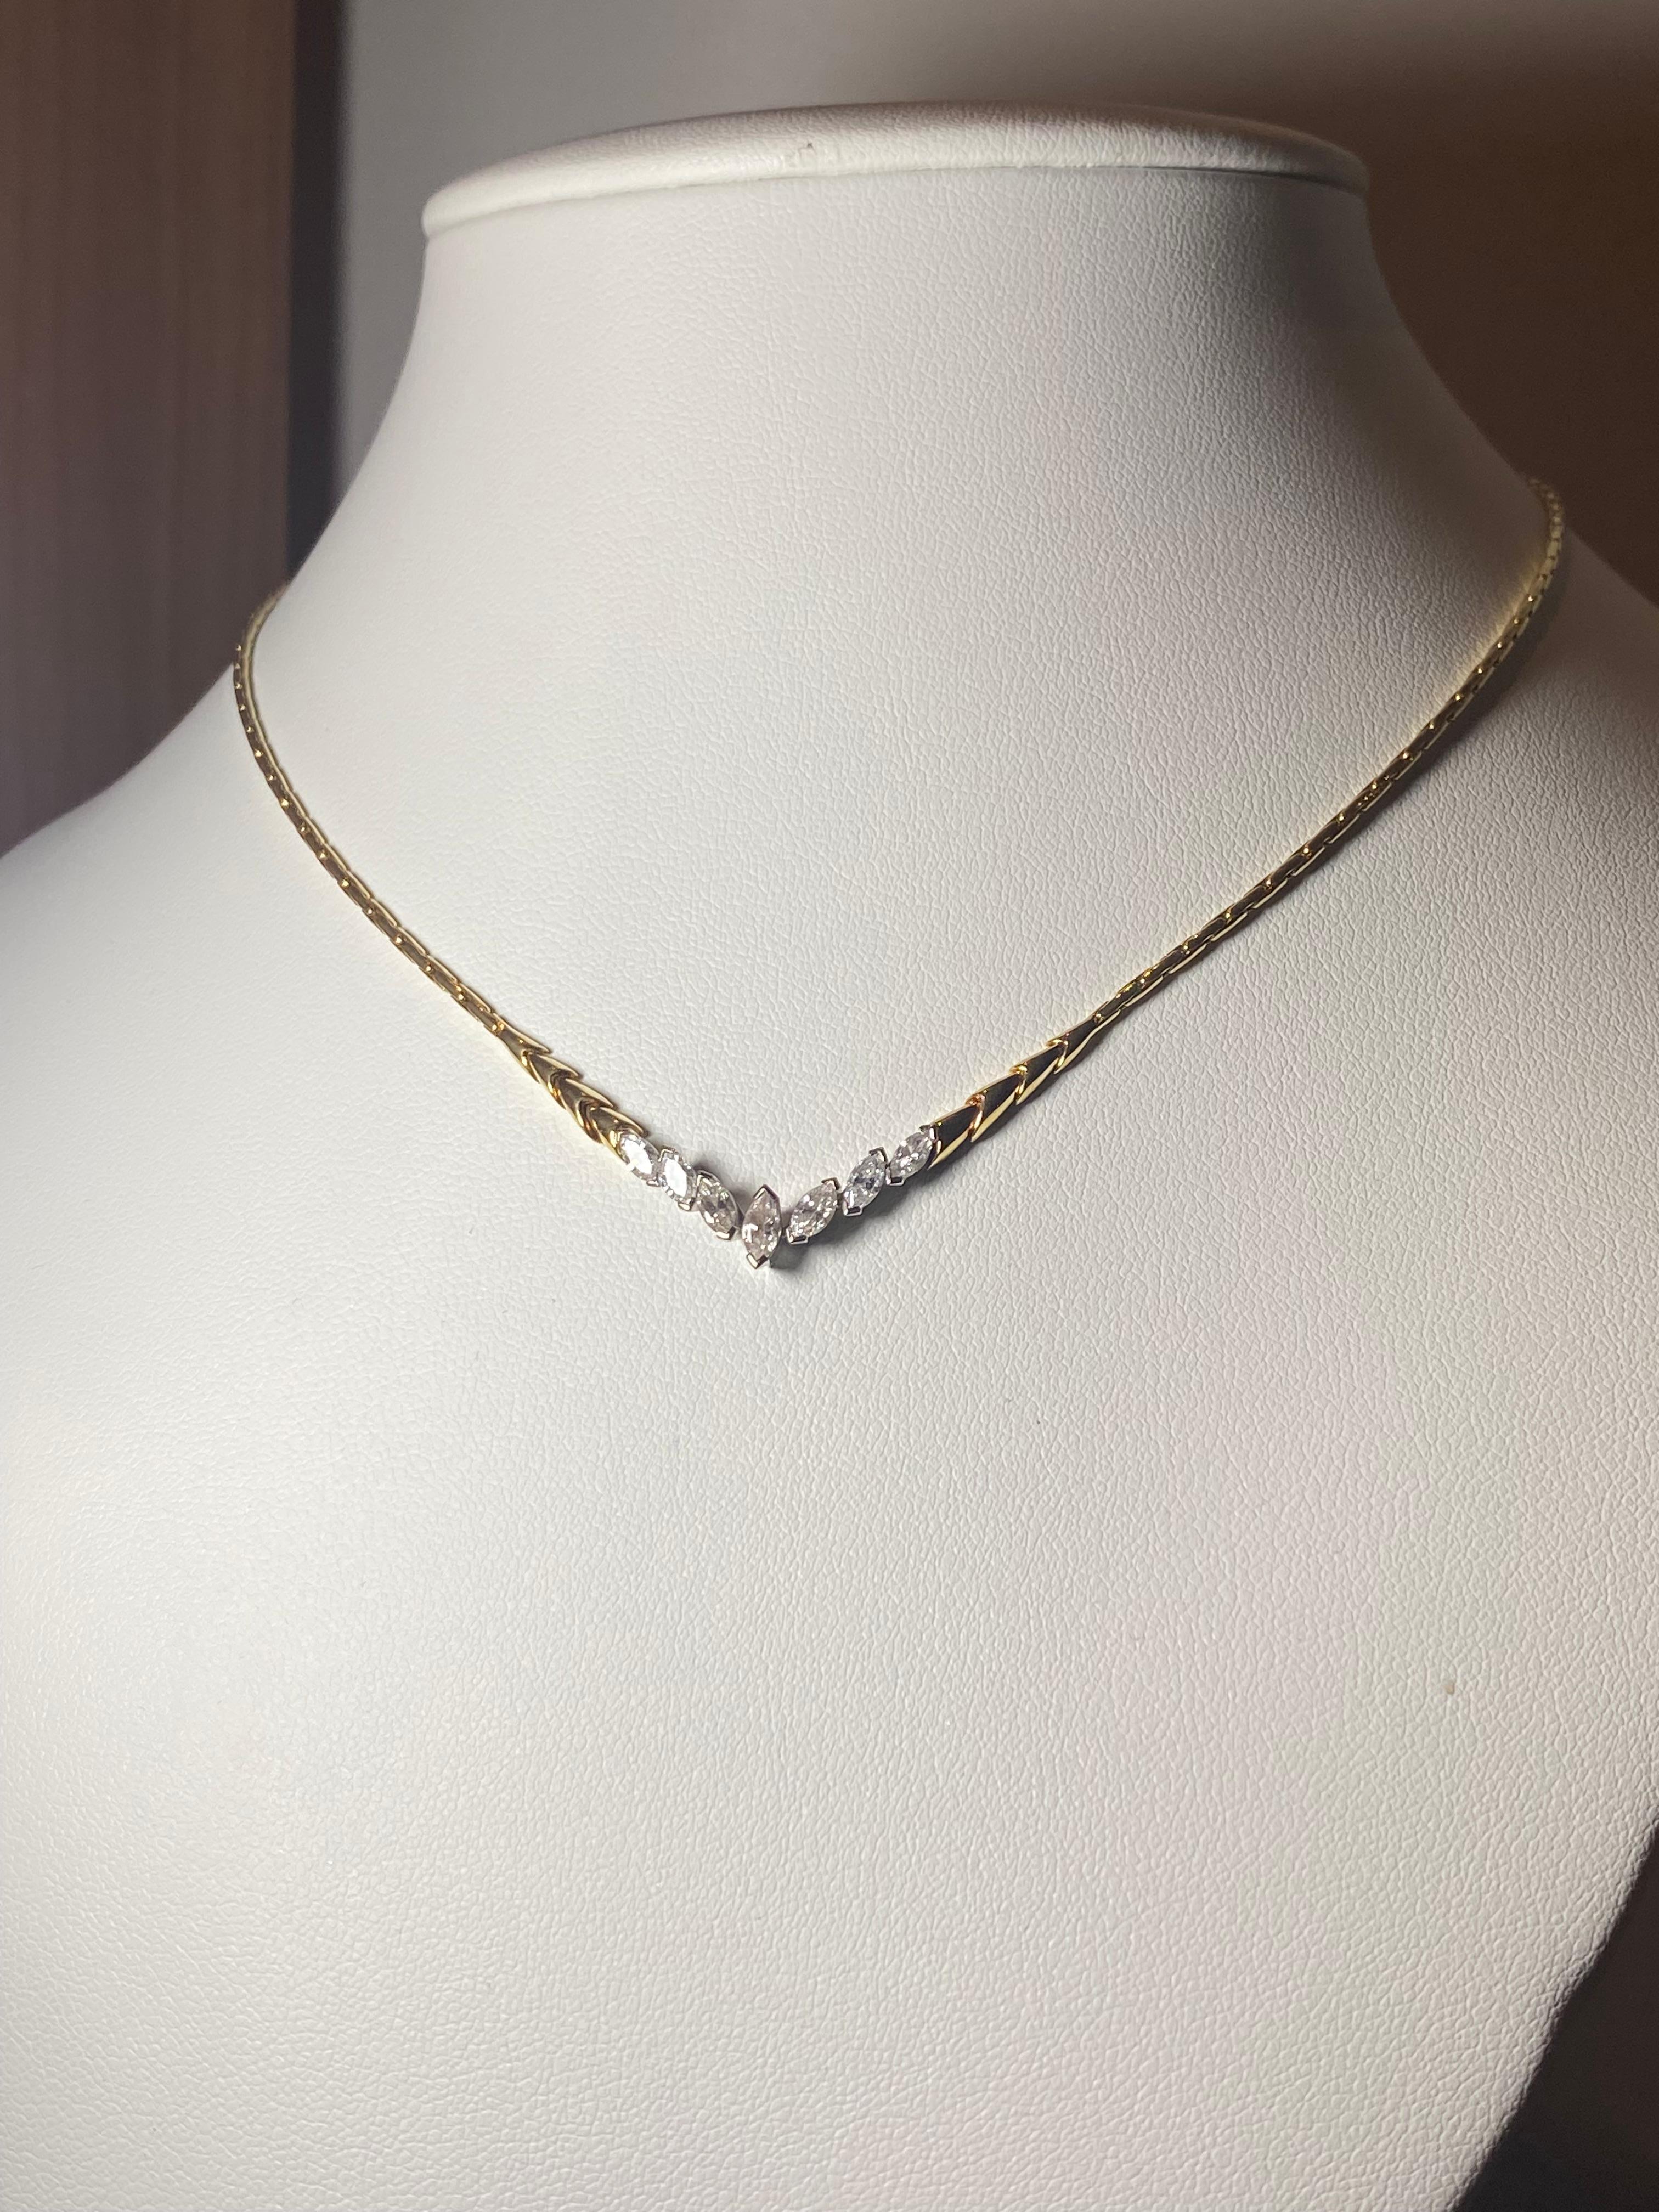 1.00ct Marquise Diamond (x 7) Necklace in 18K Yellow Gold, valued at $5900. For Sale 3